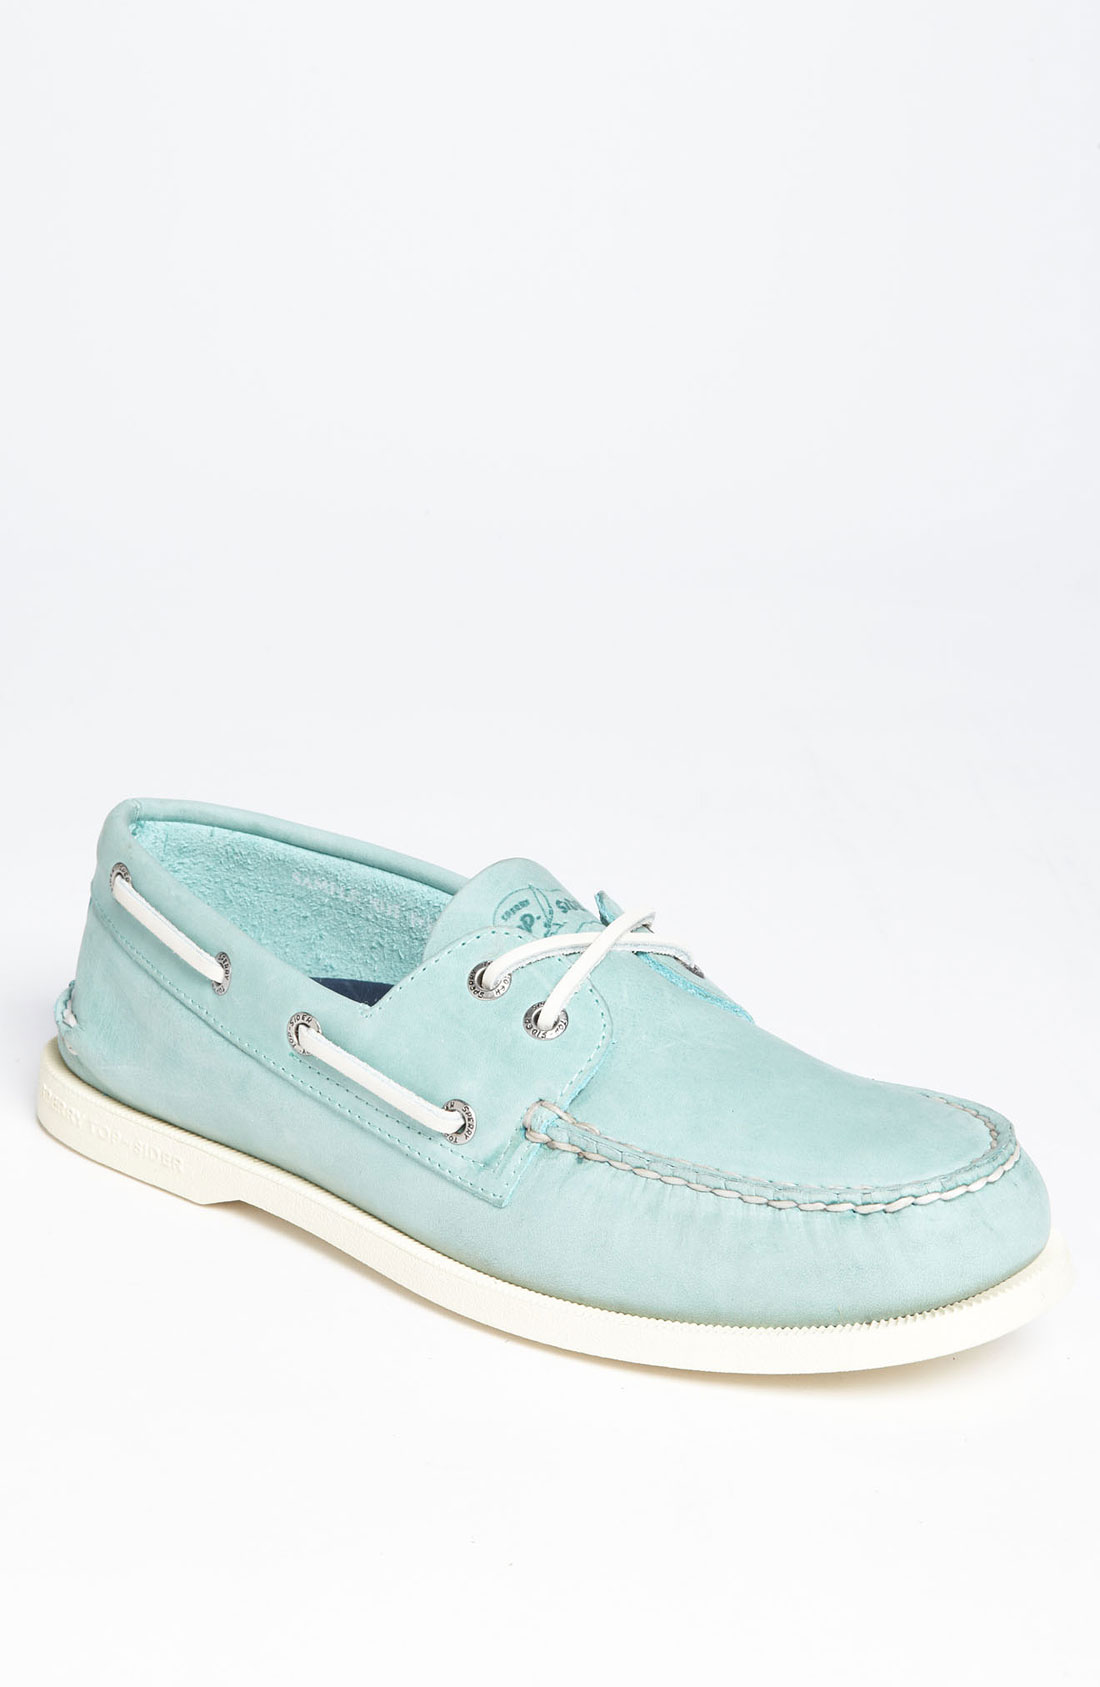 Sperry Top-sider Authentic Original Boat Shoe in Blue for Men (light ...